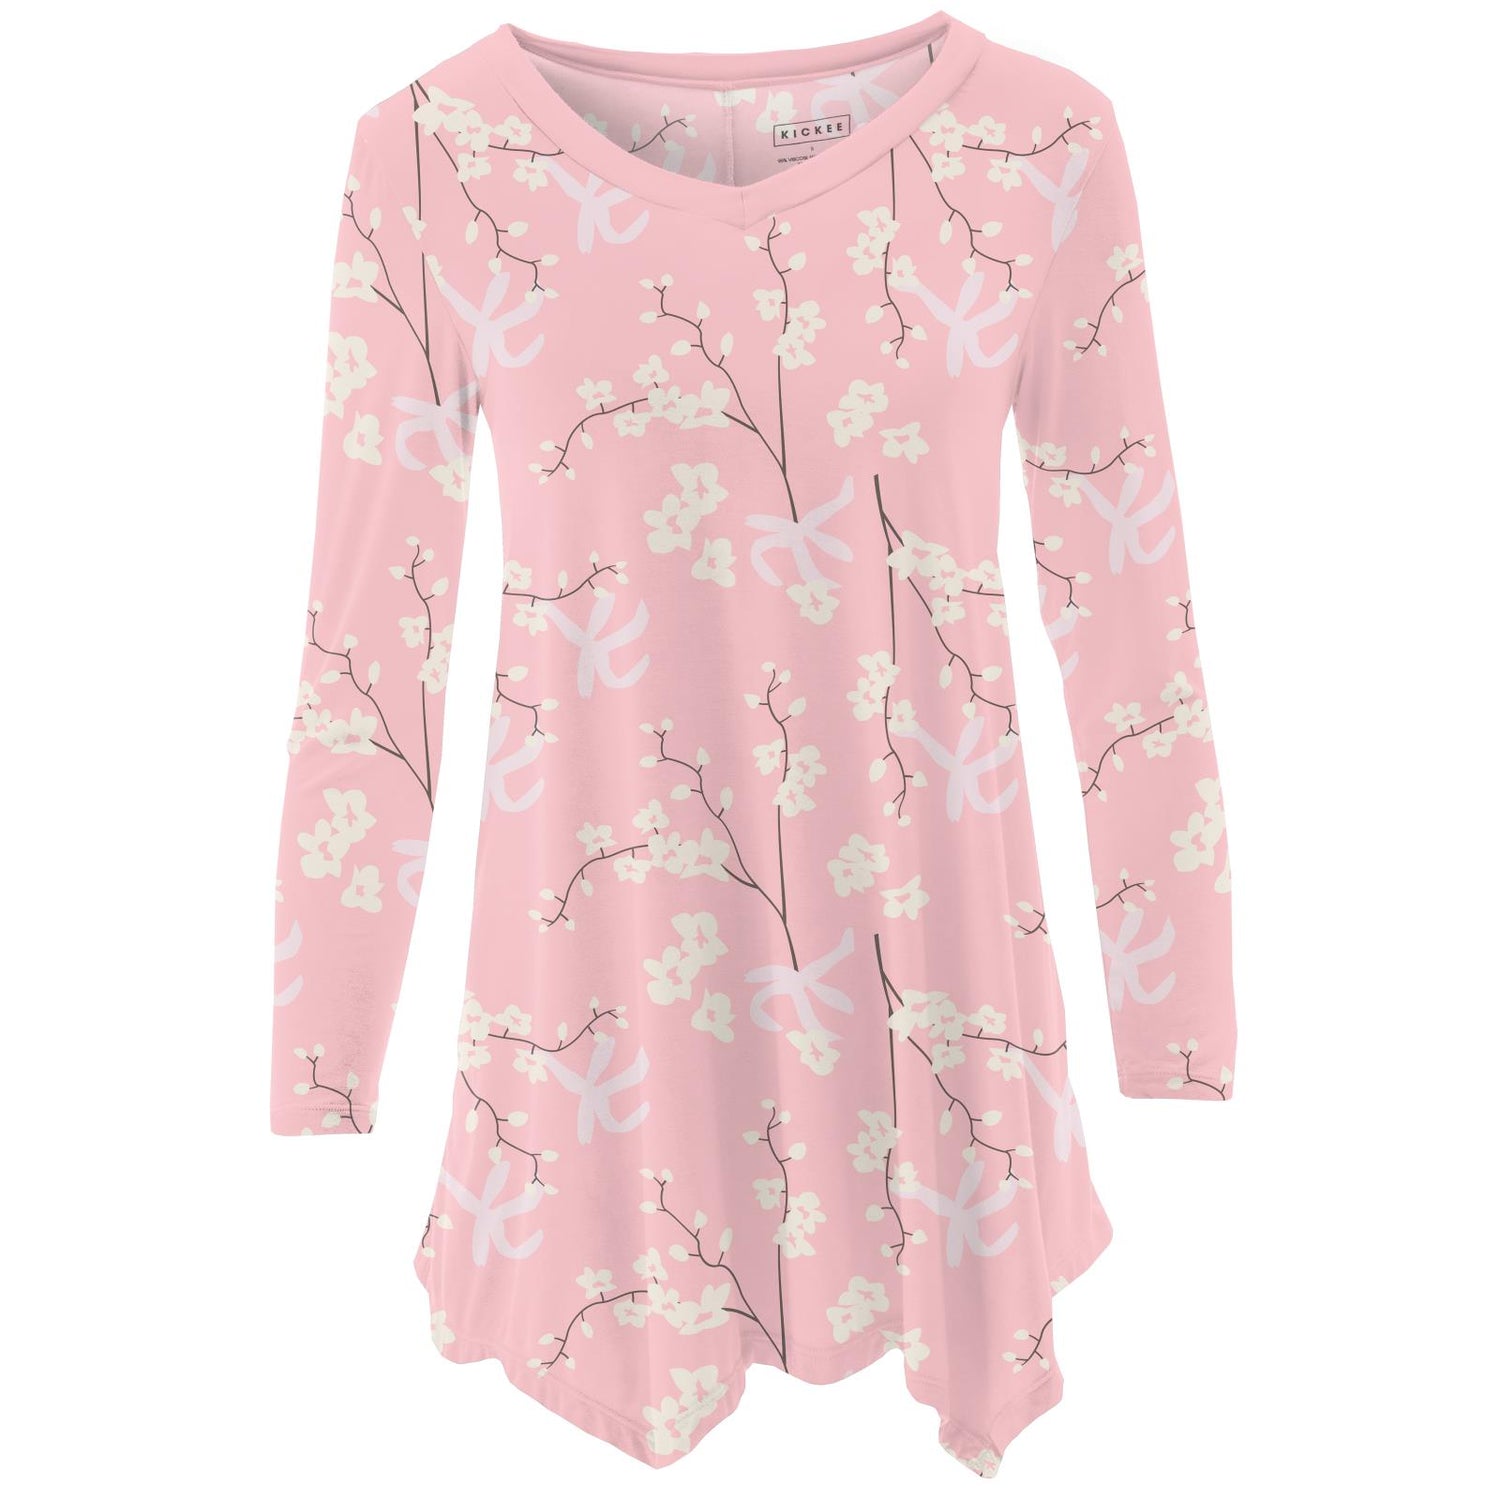 Women's Print Long Sleeve Tunic in Lotus Orchid Print